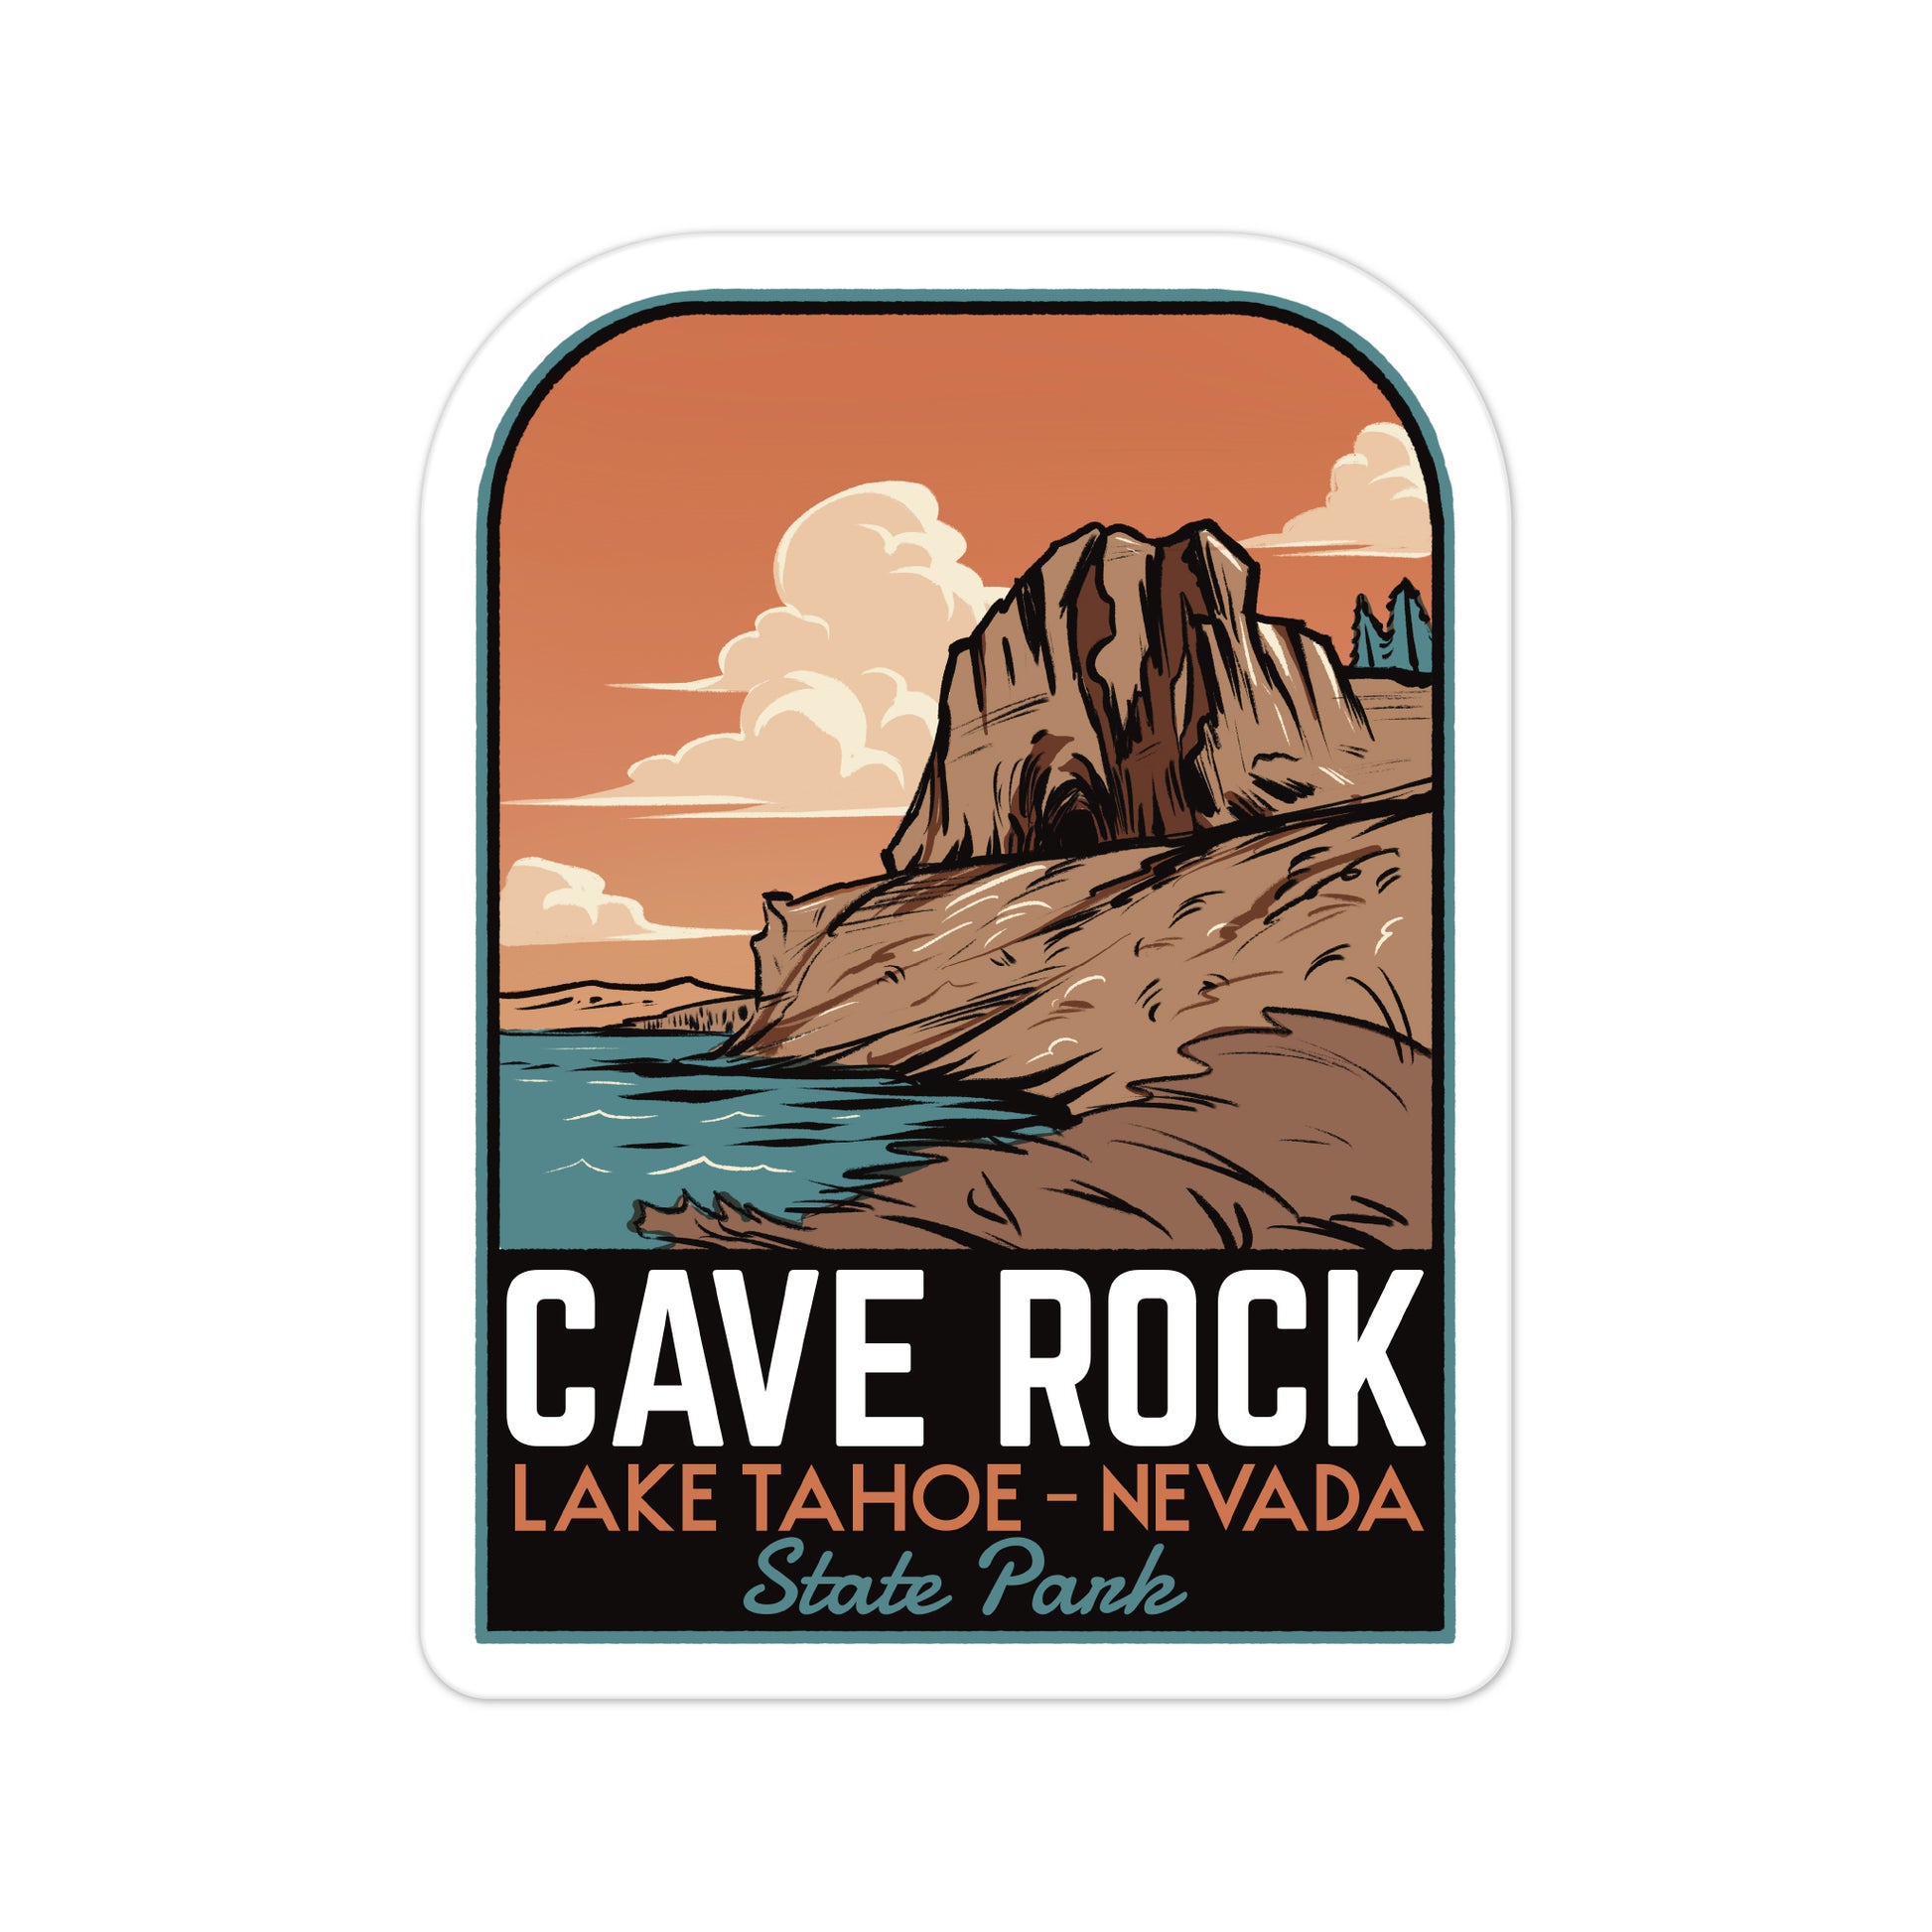 A sticker of Cave Rock State Park